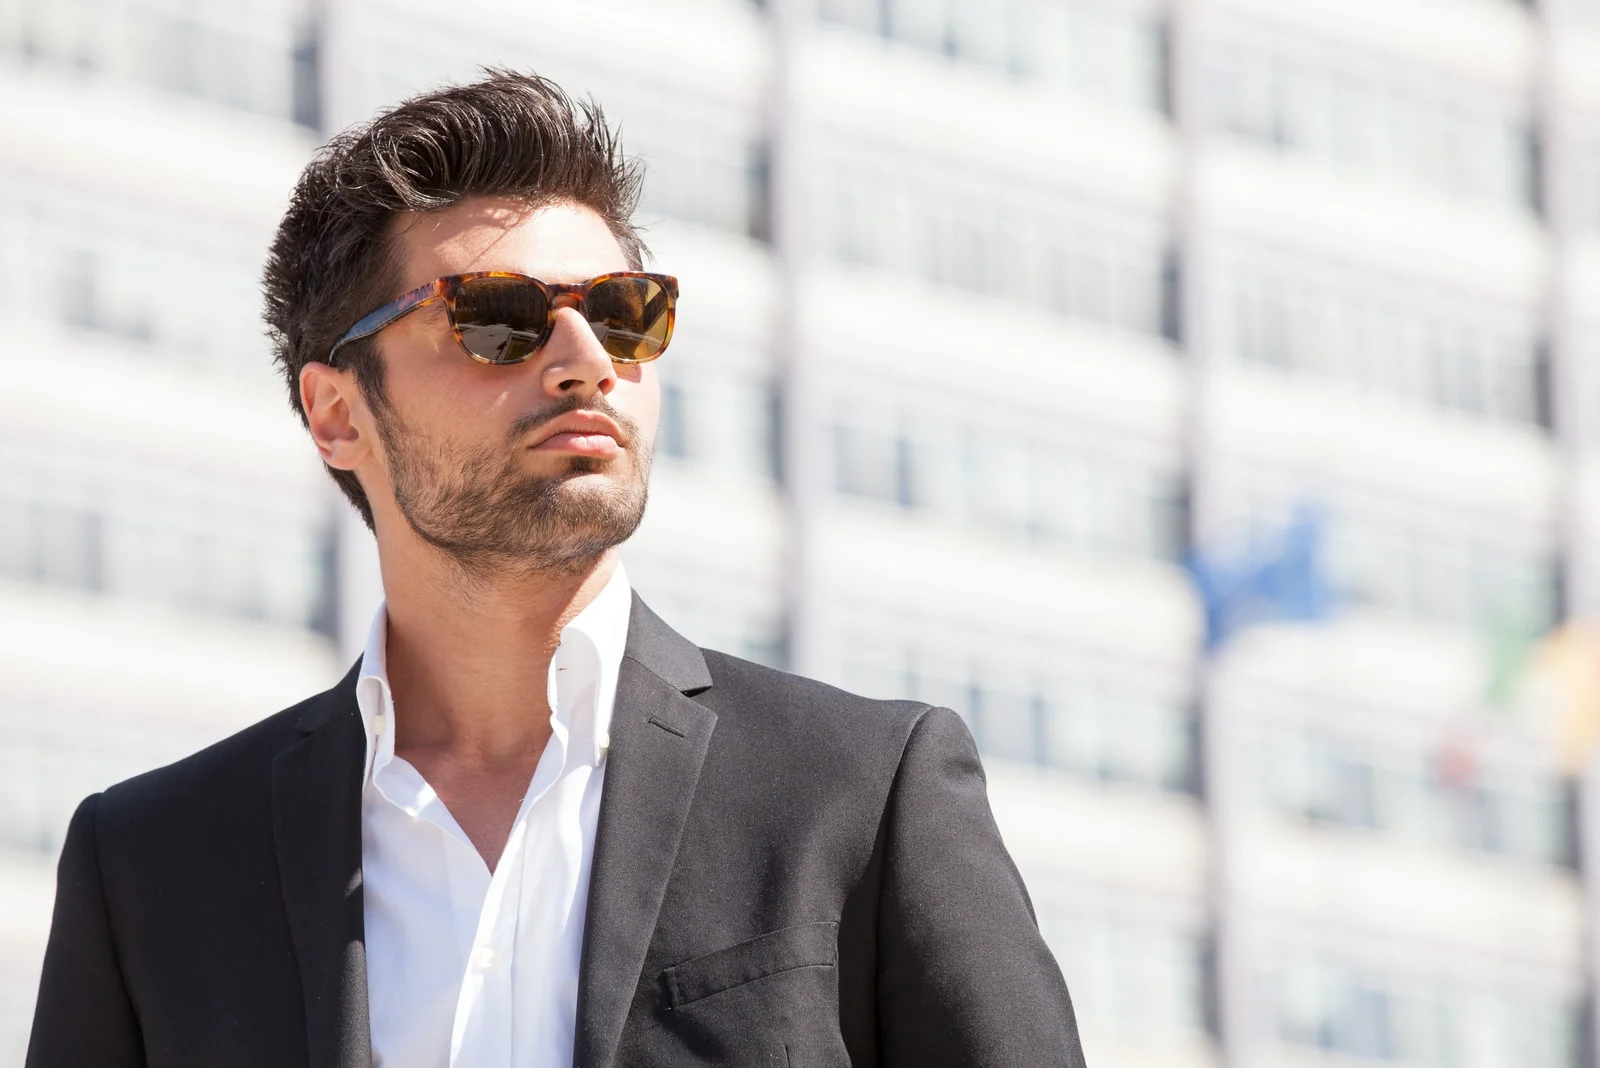 handsome man in suit wearing sunglasses